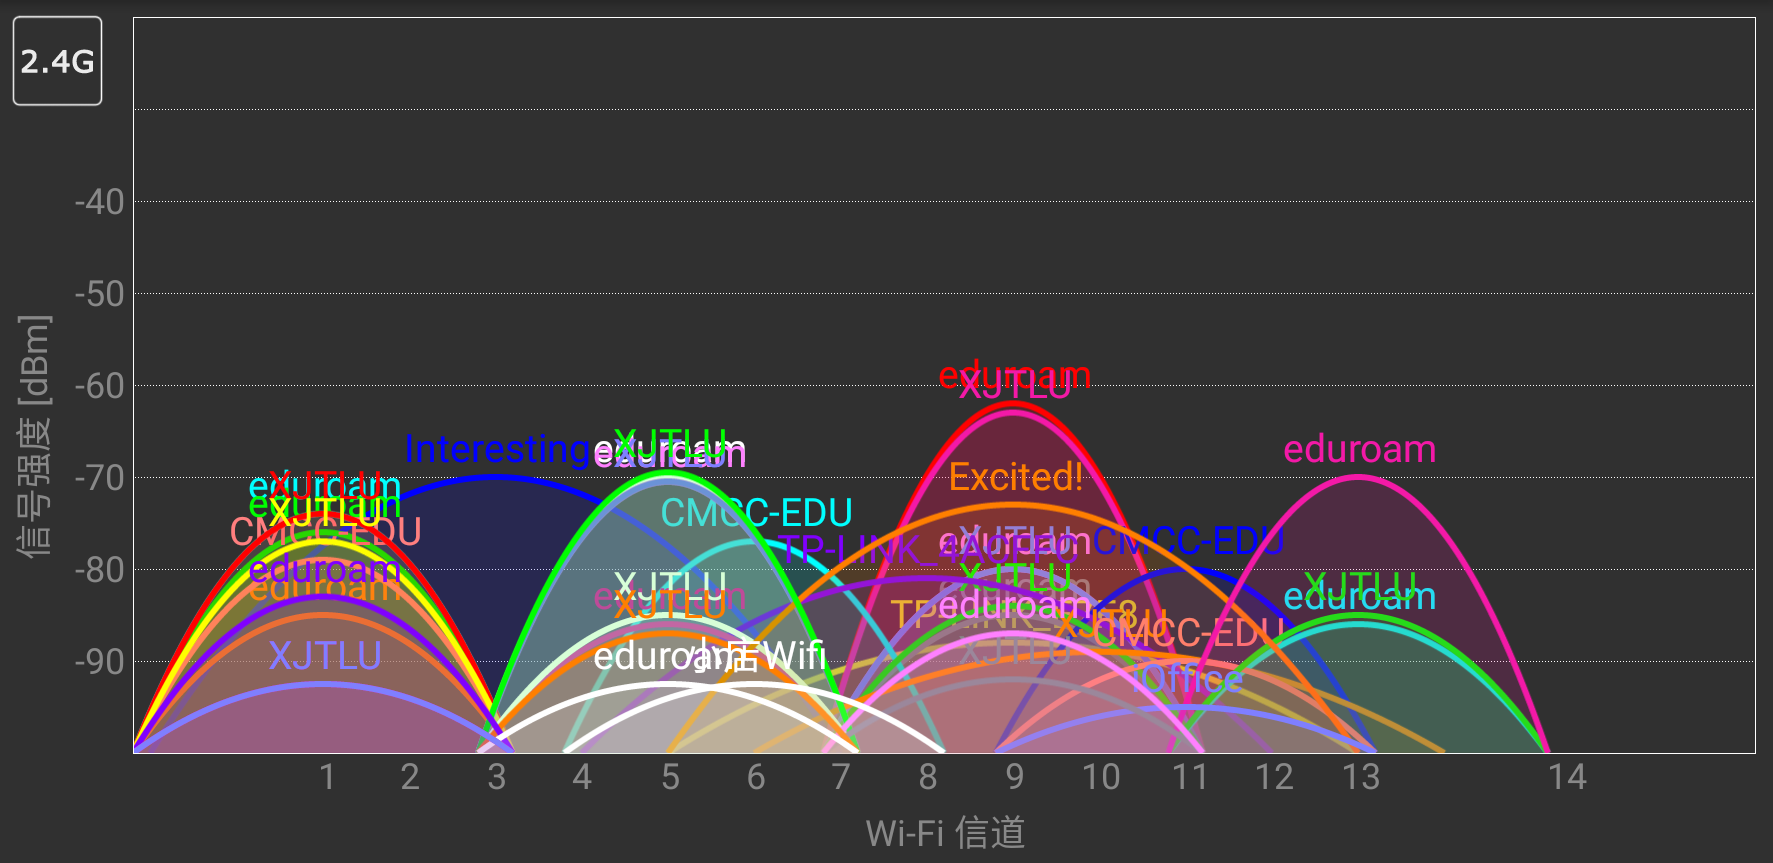 frequency_channels_2.4G